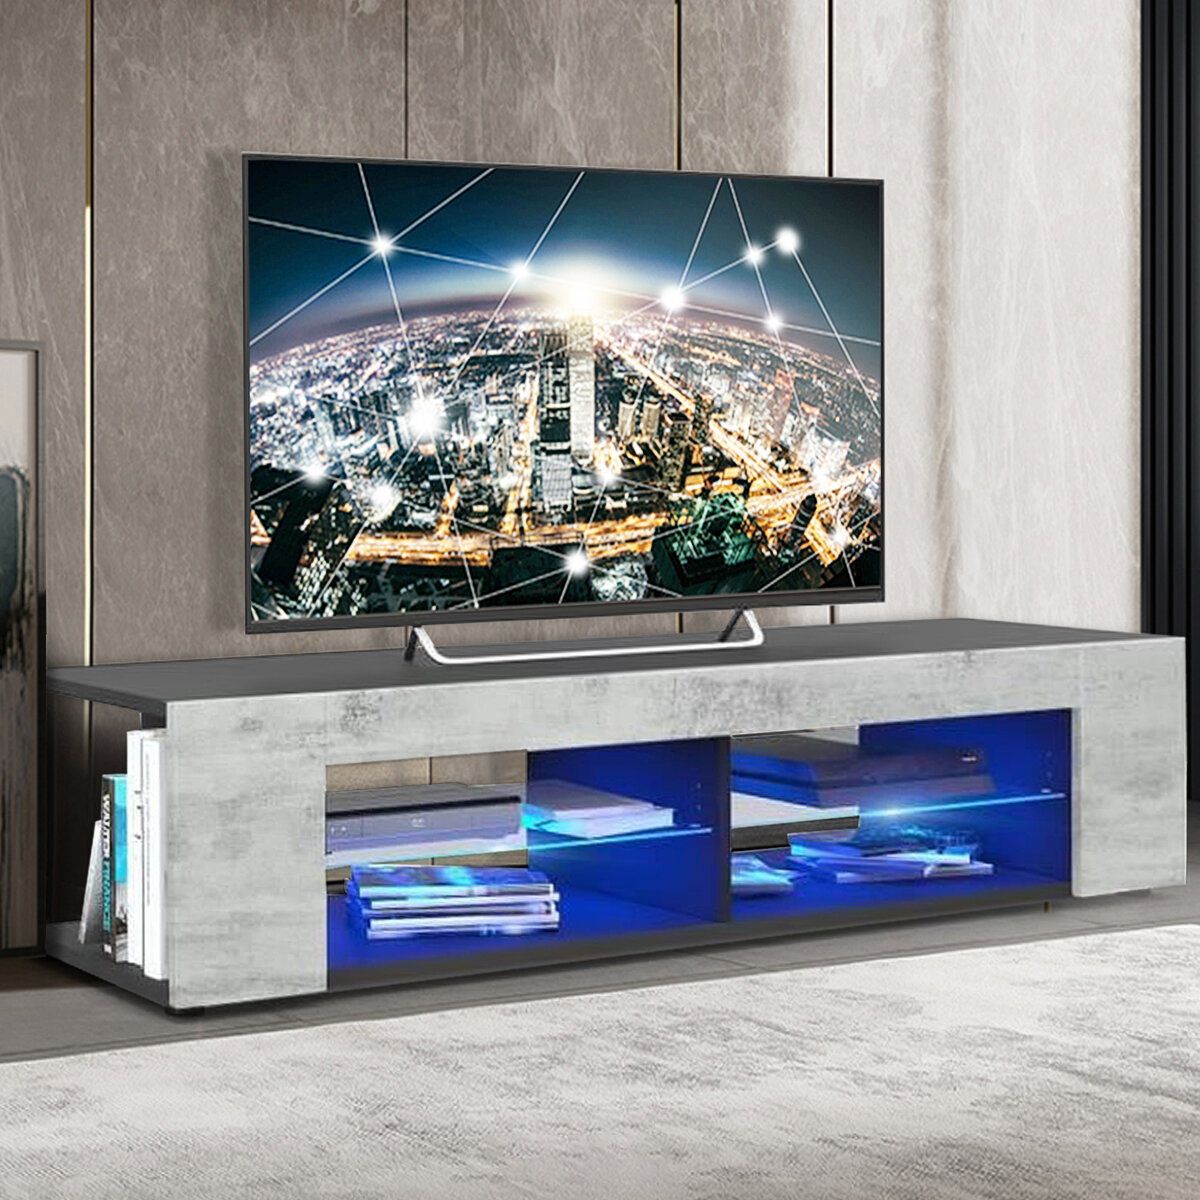 Image of Woodyhome High Gloss TV Stand with LED Lights Modern TV Console Storage Holder with 4 Open Layers Entertainment Center f